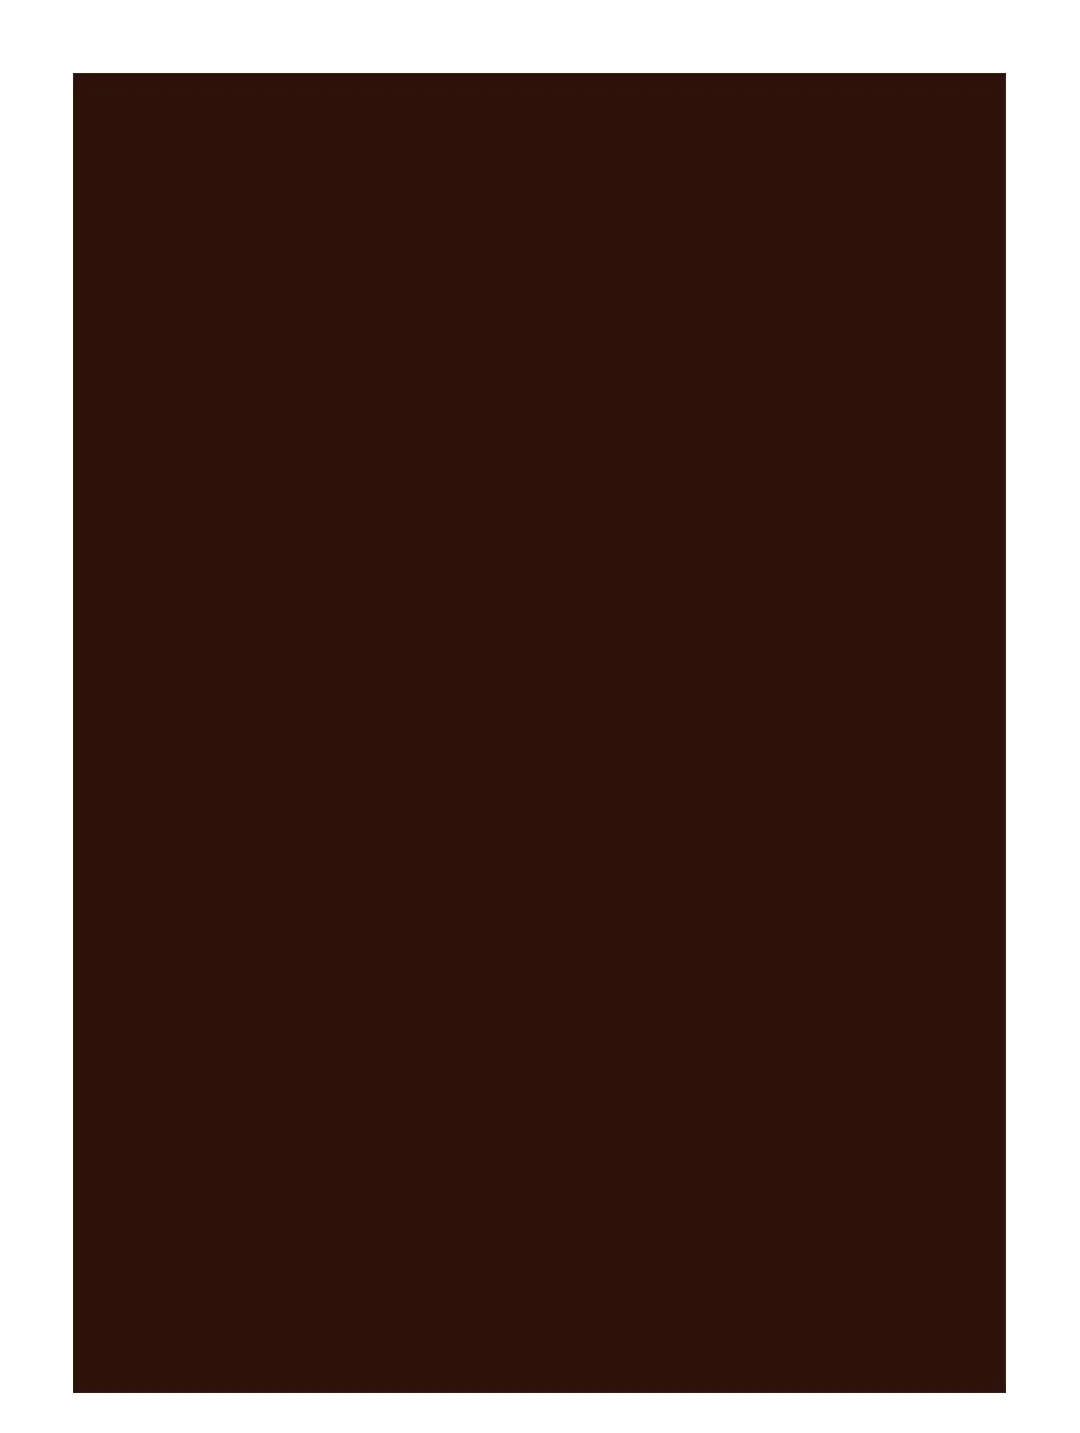 Alutech - Sober Solid | EX-123 - CHOCOLATE BROWN